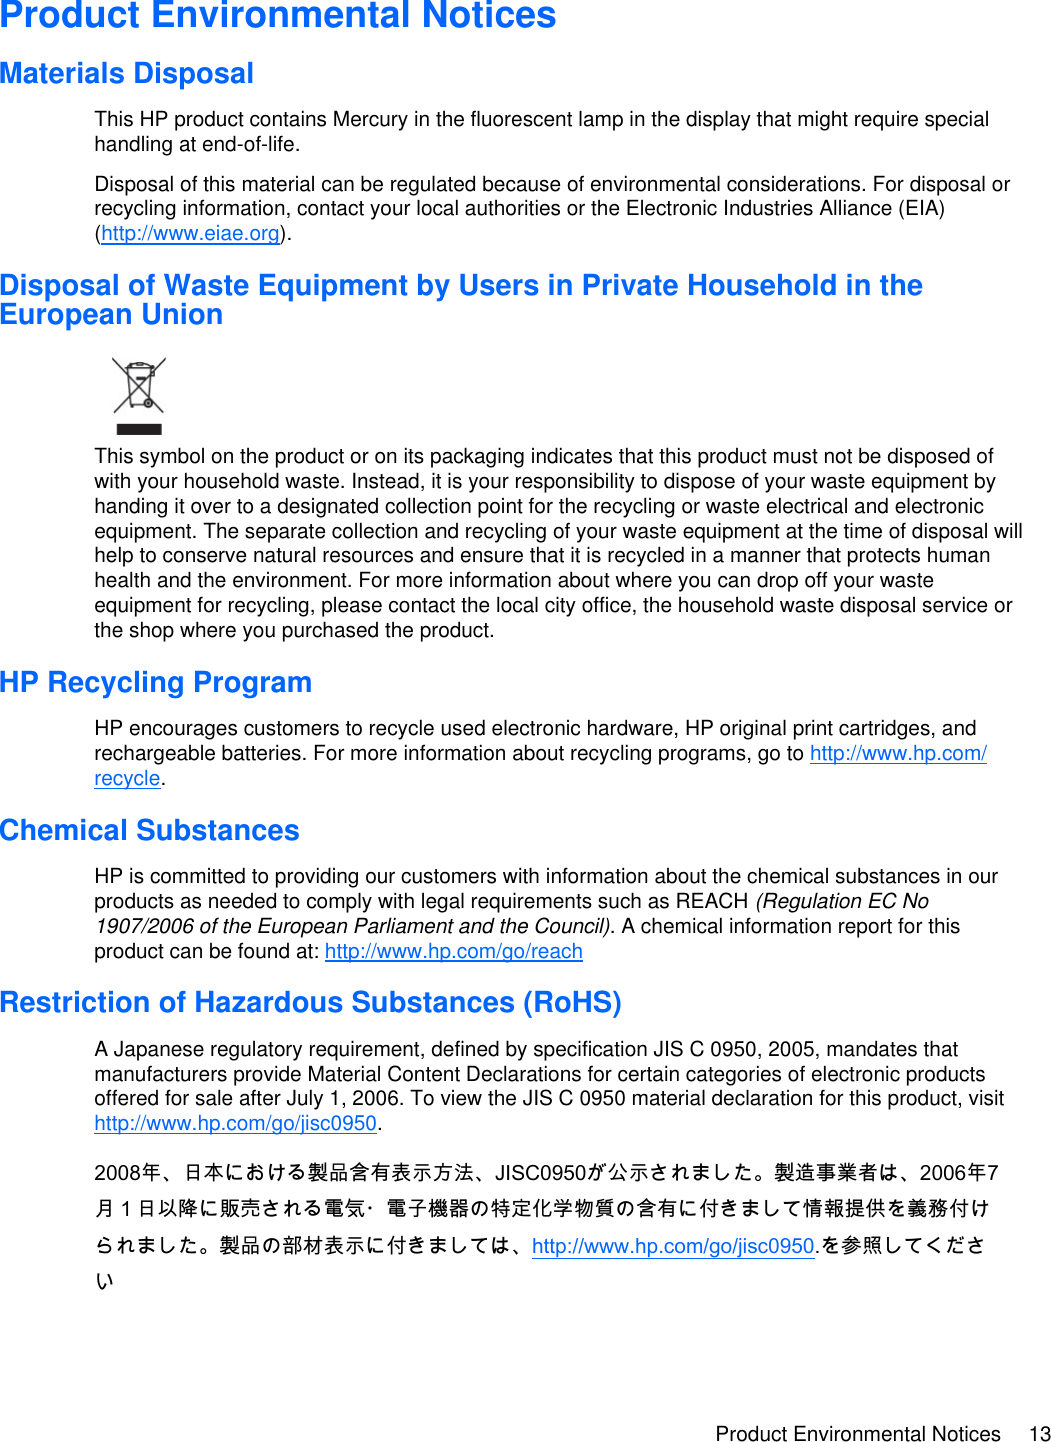 Product Environmental Notices 13  Product Environmental Notices Materials Disposal This HP product contains Mercury in the fluorescent lamp in the display that might require special handling at end-of-life. Disposal of this material can be regulated because of environmental considerations. For disposal or recycling information, contact your local authorities or the Electronic Industries Alliance (EIA) (http://www.eiae.org).  Disposal of Waste Equipment by Users in Private Household in the European Union  This symbol on the product or on its packaging indicates that this product must not be disposed of with your household waste. Instead, it is your responsibility to dispose of your waste equipment by handing it over to a designated collection point for the recycling or waste electrical and electronic equipment. The separate collection and recycling of your waste equipment at the time of disposal will help to conserve natural resources and ensure that it is recycled in a manner that protects human health and the environment. For more information about where you can drop off your waste equipment for recycling, please contact the local city office, the household waste disposal service or the shop where you purchased the product.  HP Recycling Program HP encourages customers to recycle used electronic hardware, HP original print cartridges, and rechargeable batteries. For more information about recycling programs, go to http://www.hp.com/ recycle.  Chemical Substances HP is committed to providing our customers with information about the chemical substances in our products as needed to comply with legal requirements such as REACH (Regulation EC No 1907/2006 of the European Parliament and the Council). A chemical information report for this product can be found at: http://www.hp.com/go/reach  Restriction of Hazardous Substances (RoHS) A Japanese regulatory requirement, defined by specification JIS C 0950, 2005, mandates that manufacturers provide Material Content Declarations for certain categories of electronic products offered for sale after July 1, 2006. To view the JIS C 0950 material declaration for this product, visit http://www.hp.com/go/jisc0950. 2008年、日本における製品含有表示方法、JISC0950が公示されました。製造事業者は、2006年7月１日以降に販売される電気・電子機器の特定化学物質の含有に付きまして情報提供を義務付けられました。製品の部材表示に付きましては、http://www.hp.com/go/jisc0950.を参照してください 